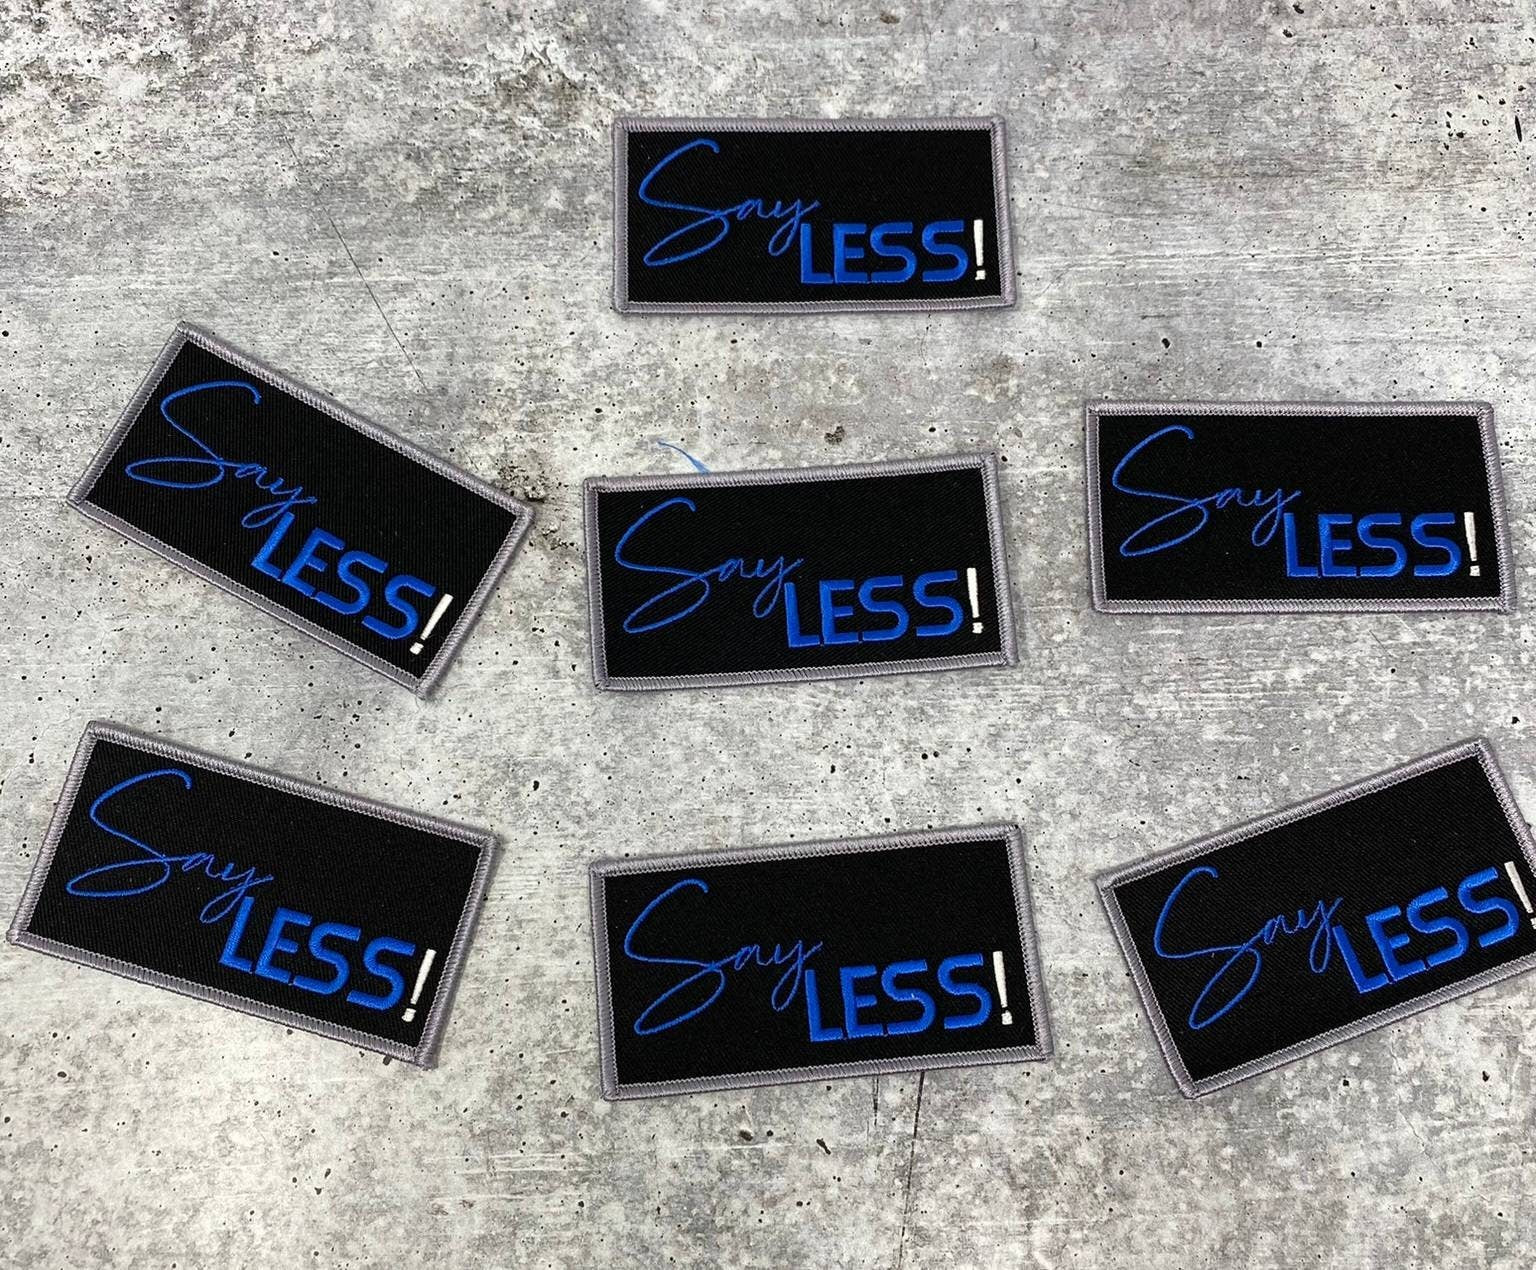 New, "Say Less" Statement 1-pc Badge, Iron-on Embroidered Patch, Small Patch, 3.75", Blue and Gray Morale Patch, Patch for Crocs and Hats